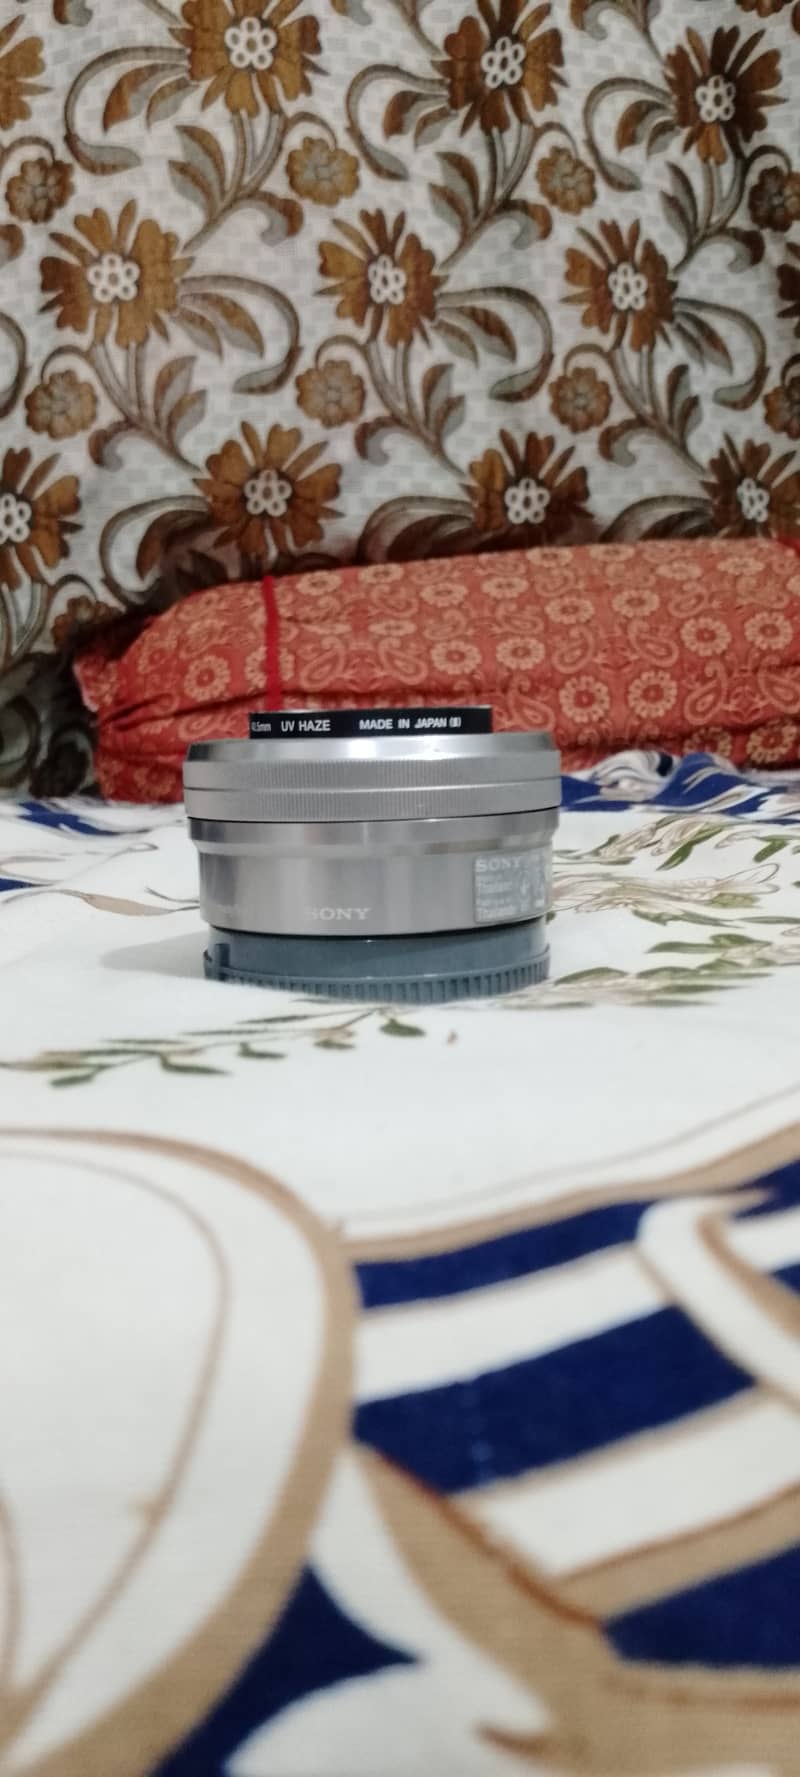 Sony 16-50mm lens urgently for sale 4